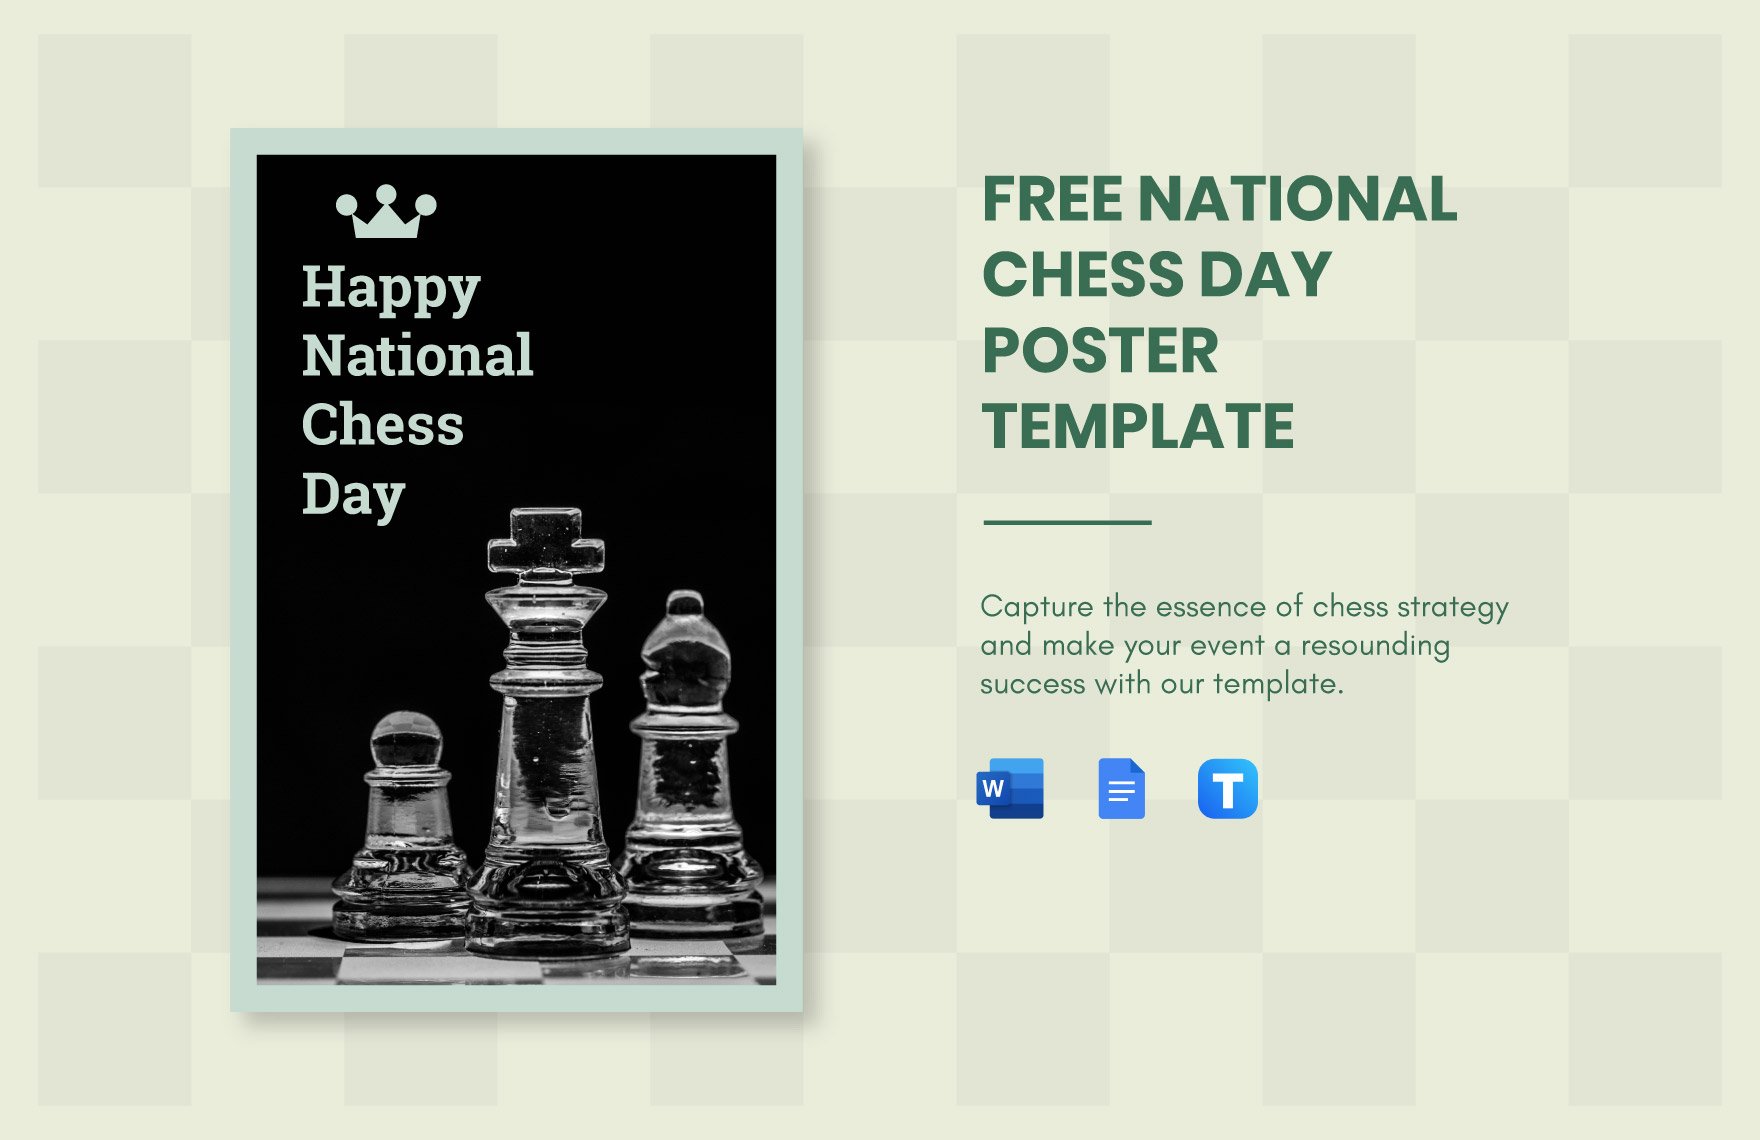 National Chess Day Poster Template in Word, Google Docs